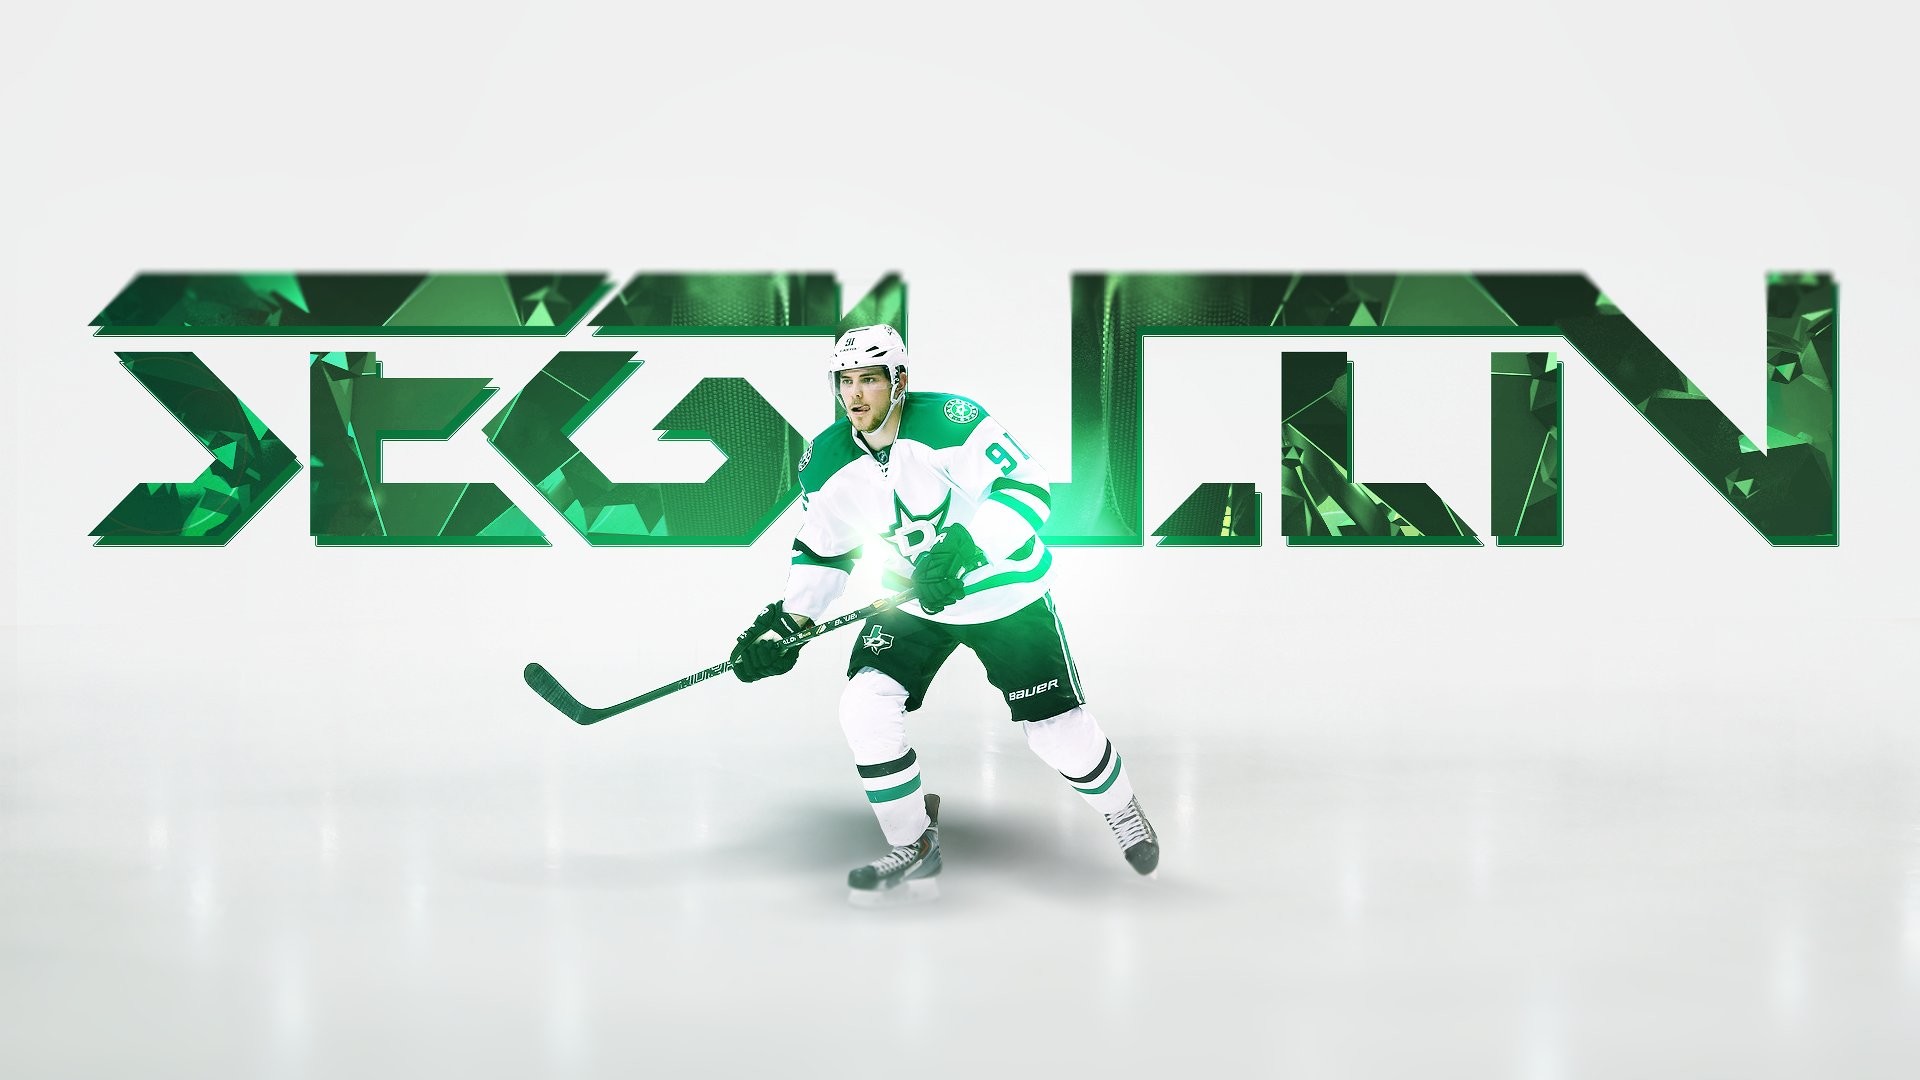 1920x1080 Cool Collections oDallas Stars Wallpapers HD For Desktop, Laptop and  Mobiles. Here You Can Download More than 5 Million Photography collections  Uploaded By ...